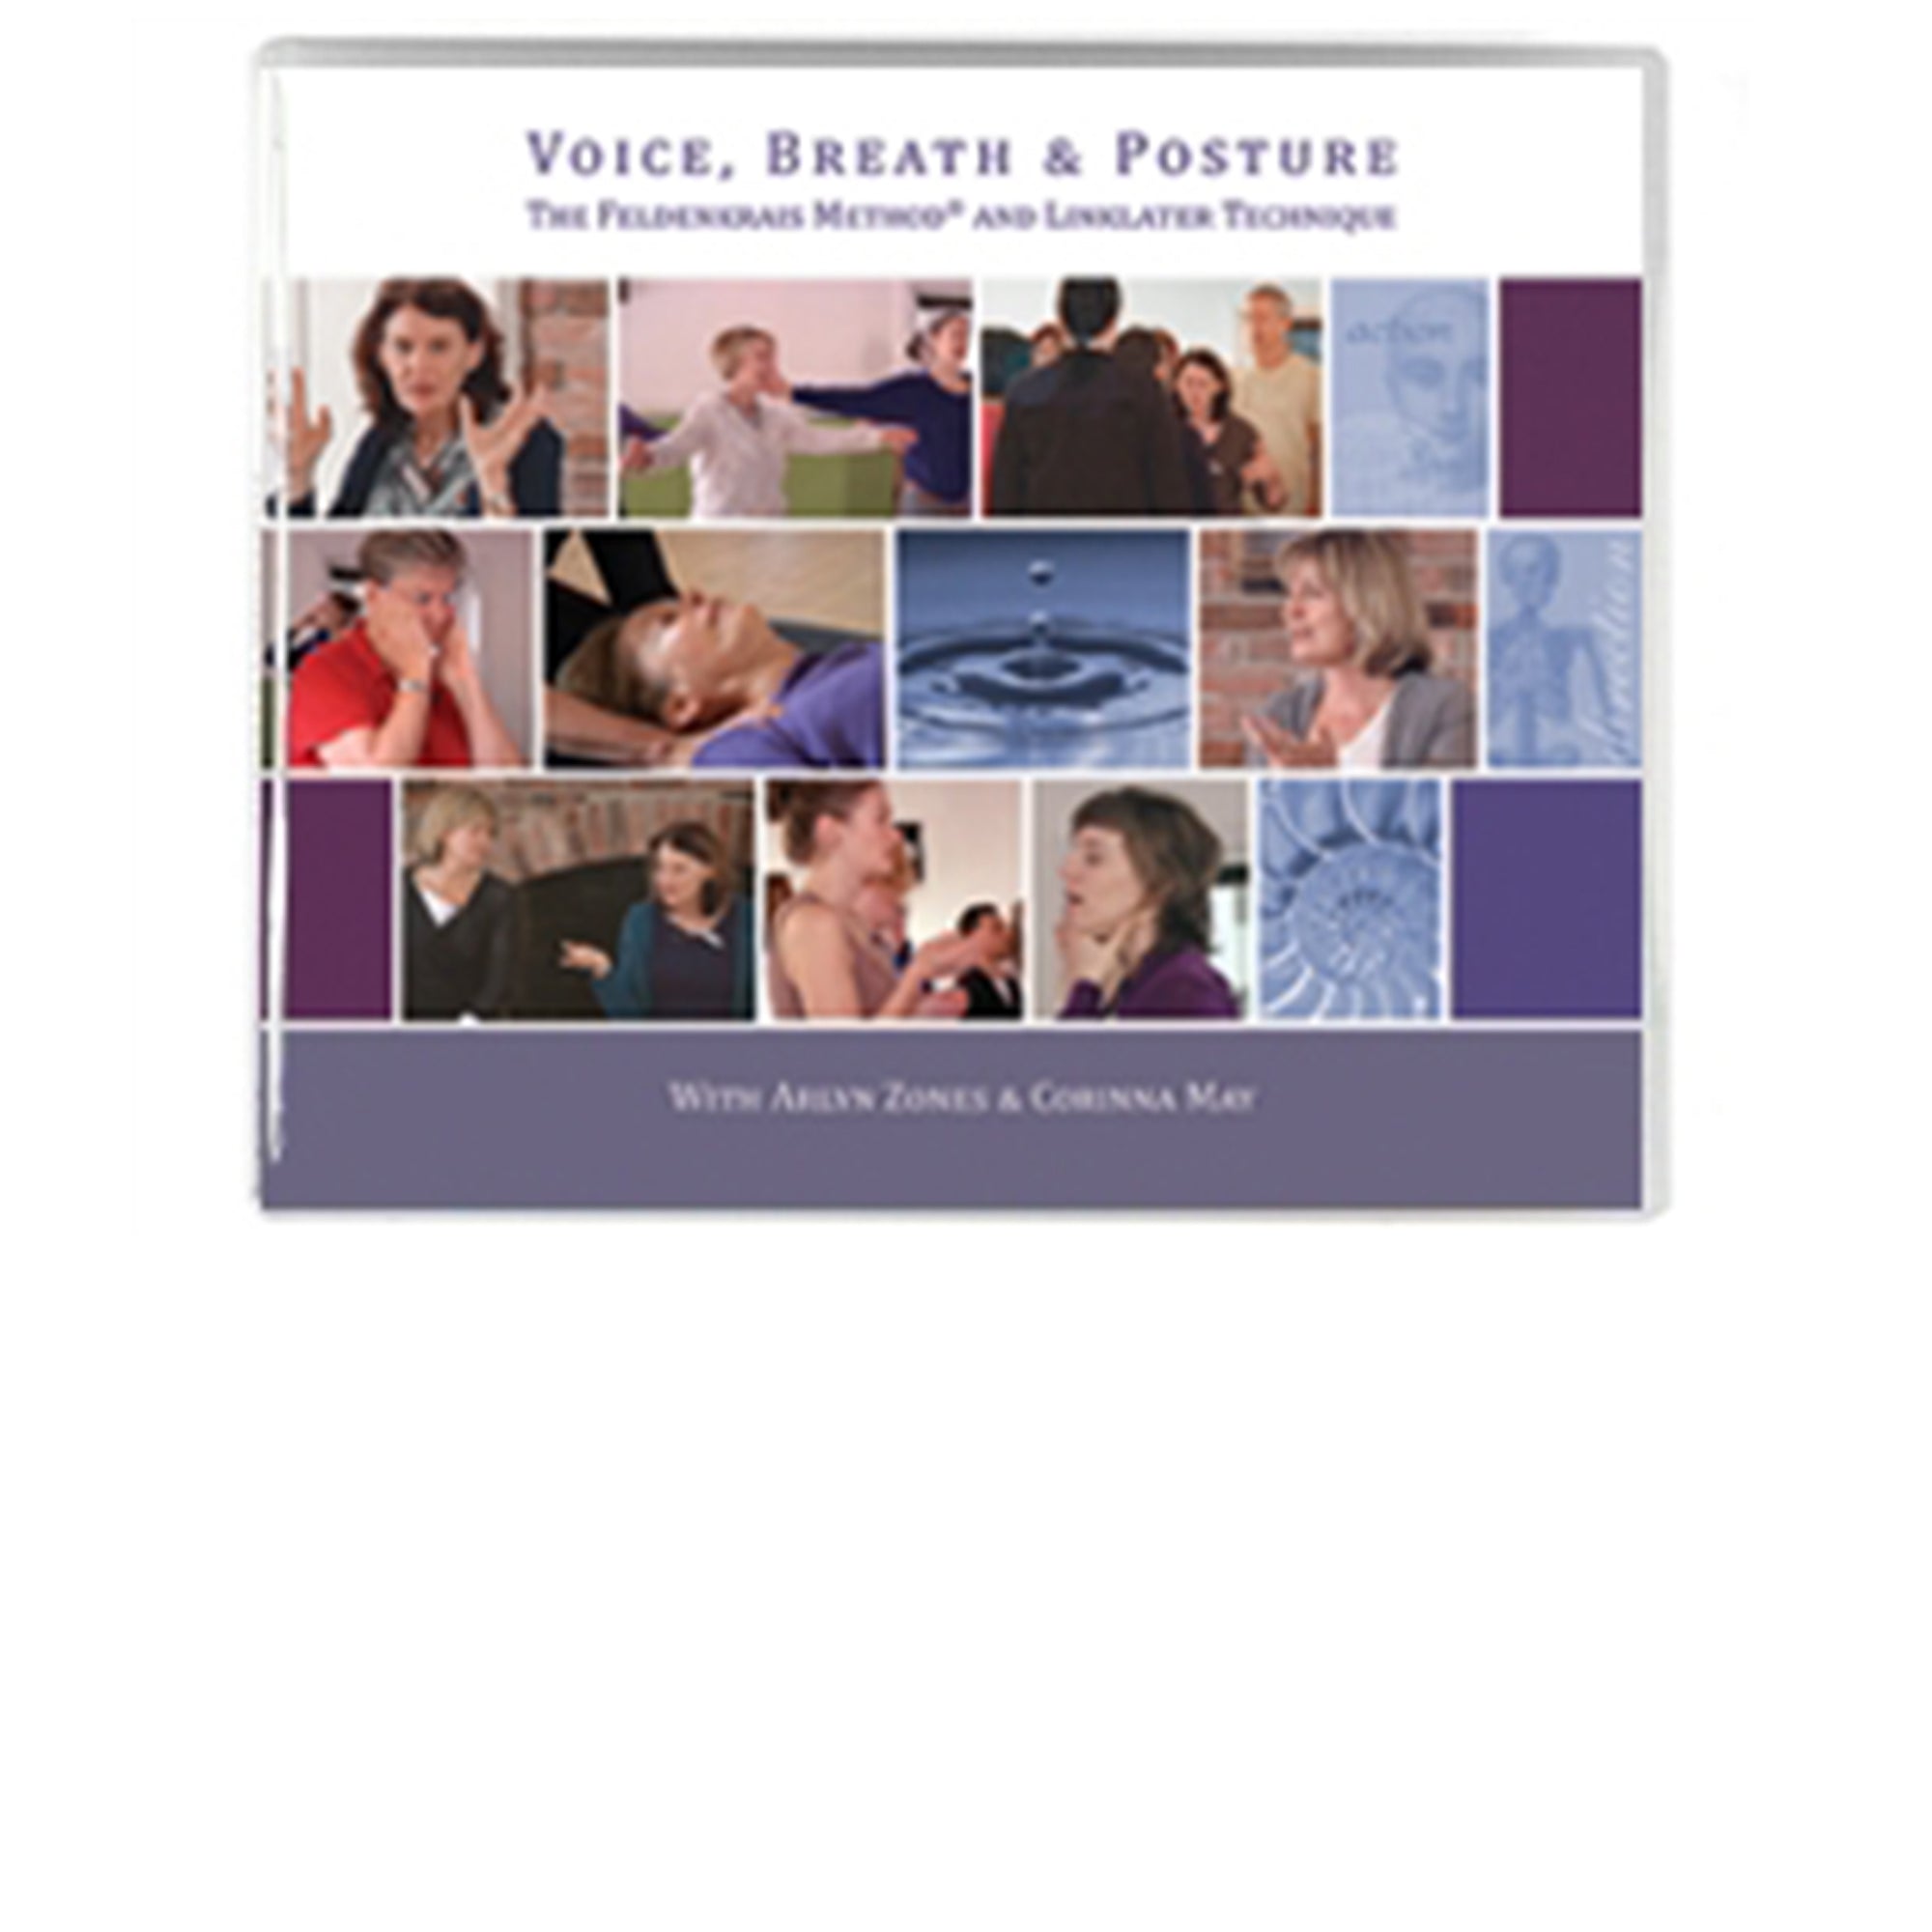 Voice, Breath and Posture